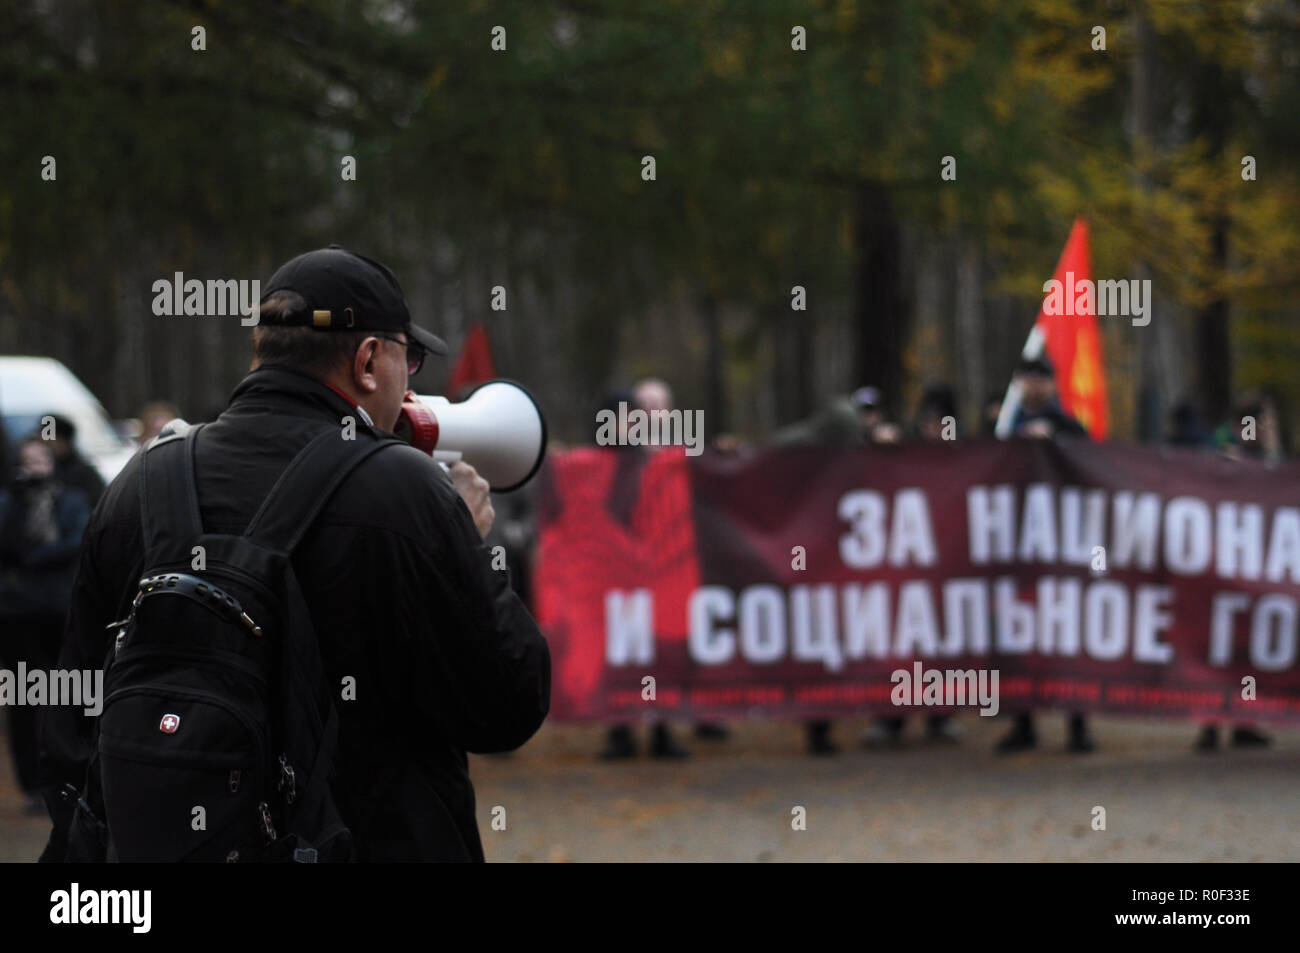 Saint Petersburg, Russia, 4th November, 2018. Russian nationalists hold a protest march and demonstration in Udelniy Park in Saint Petersburg, Russia, to celebrate National Unity Day, chanting oppositional and nationalist slogans. Credit: Aleks Lokhmutov/Alamy Live News Stock Photo